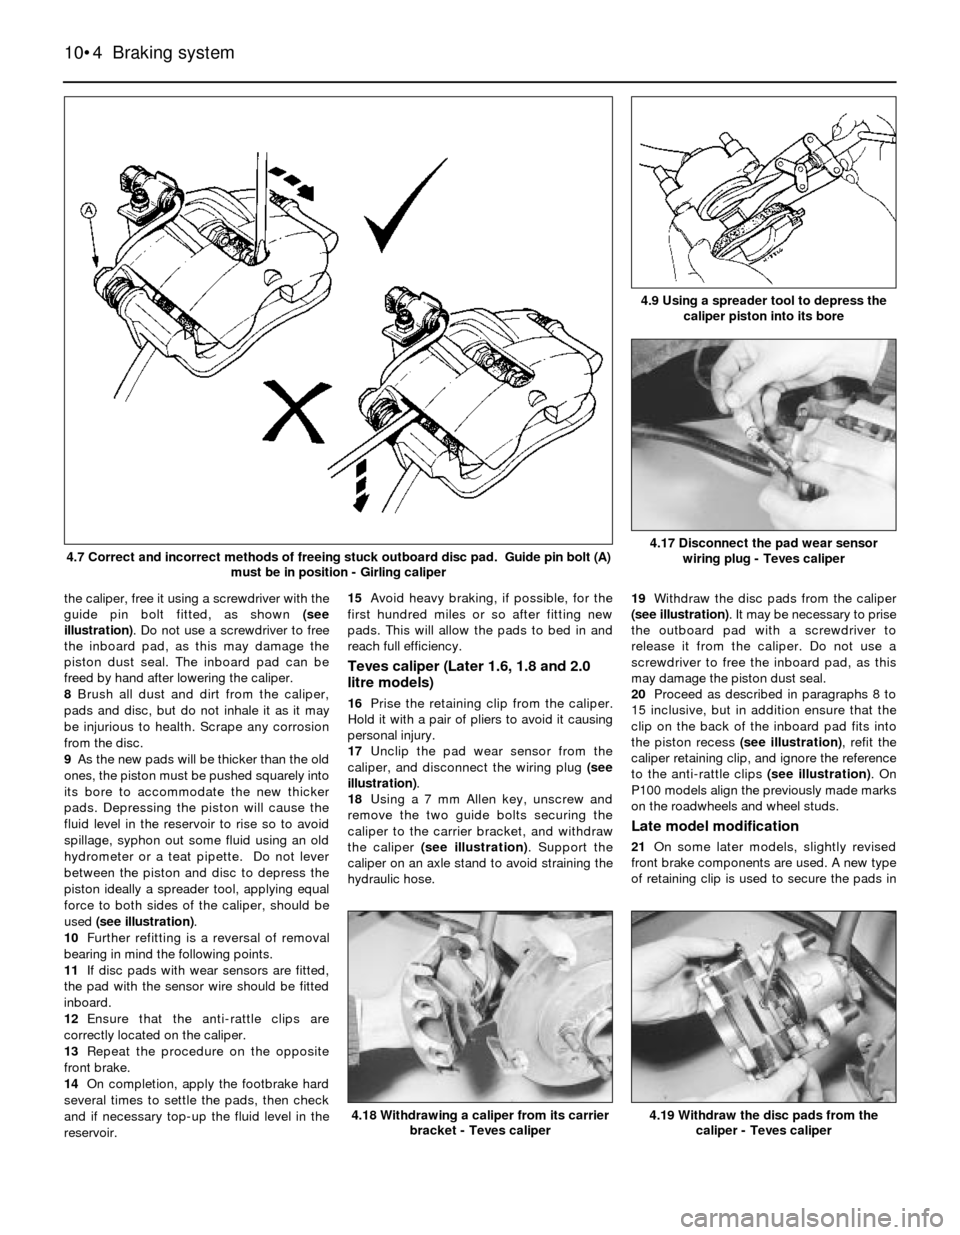 FORD SIERRA 1987 2.G Braking System Workshop Manual the caliper, free it using a screwdriver with the
guide pin bolt fitted, as shown (see
illustration). Do not use a screwdriver to free
the inboard pad, as this may damage the
piston dust seal. The inb